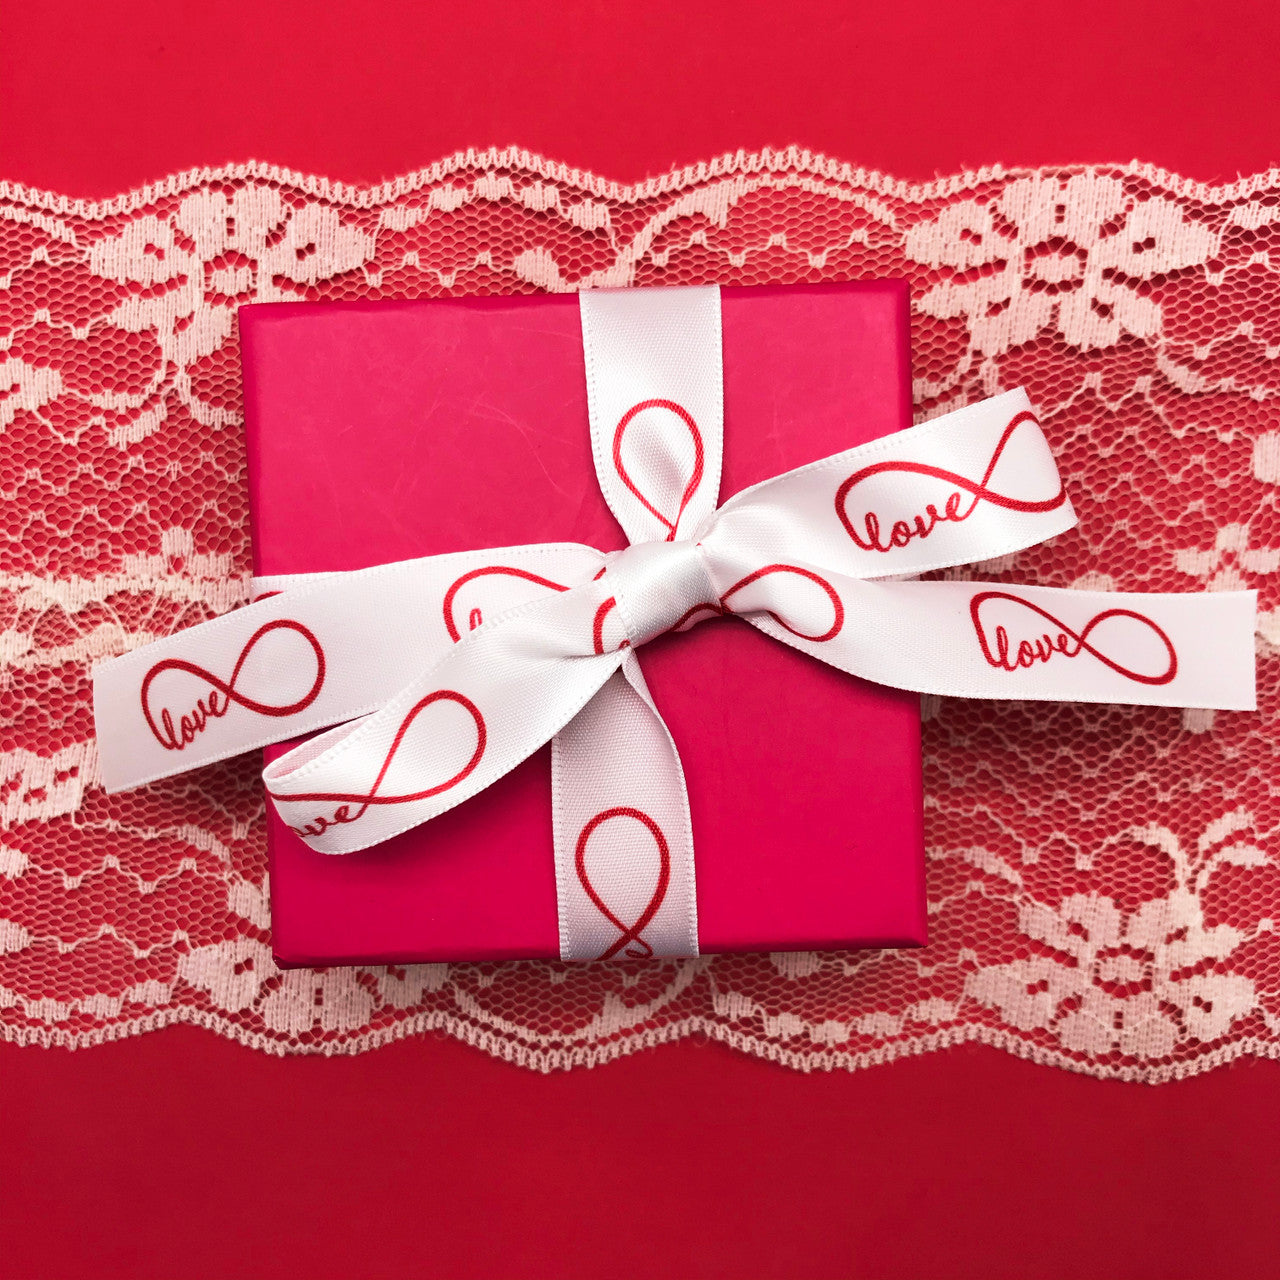 Our infinity loo[ ribbon makes a perfect bow on that special Valentine gift!